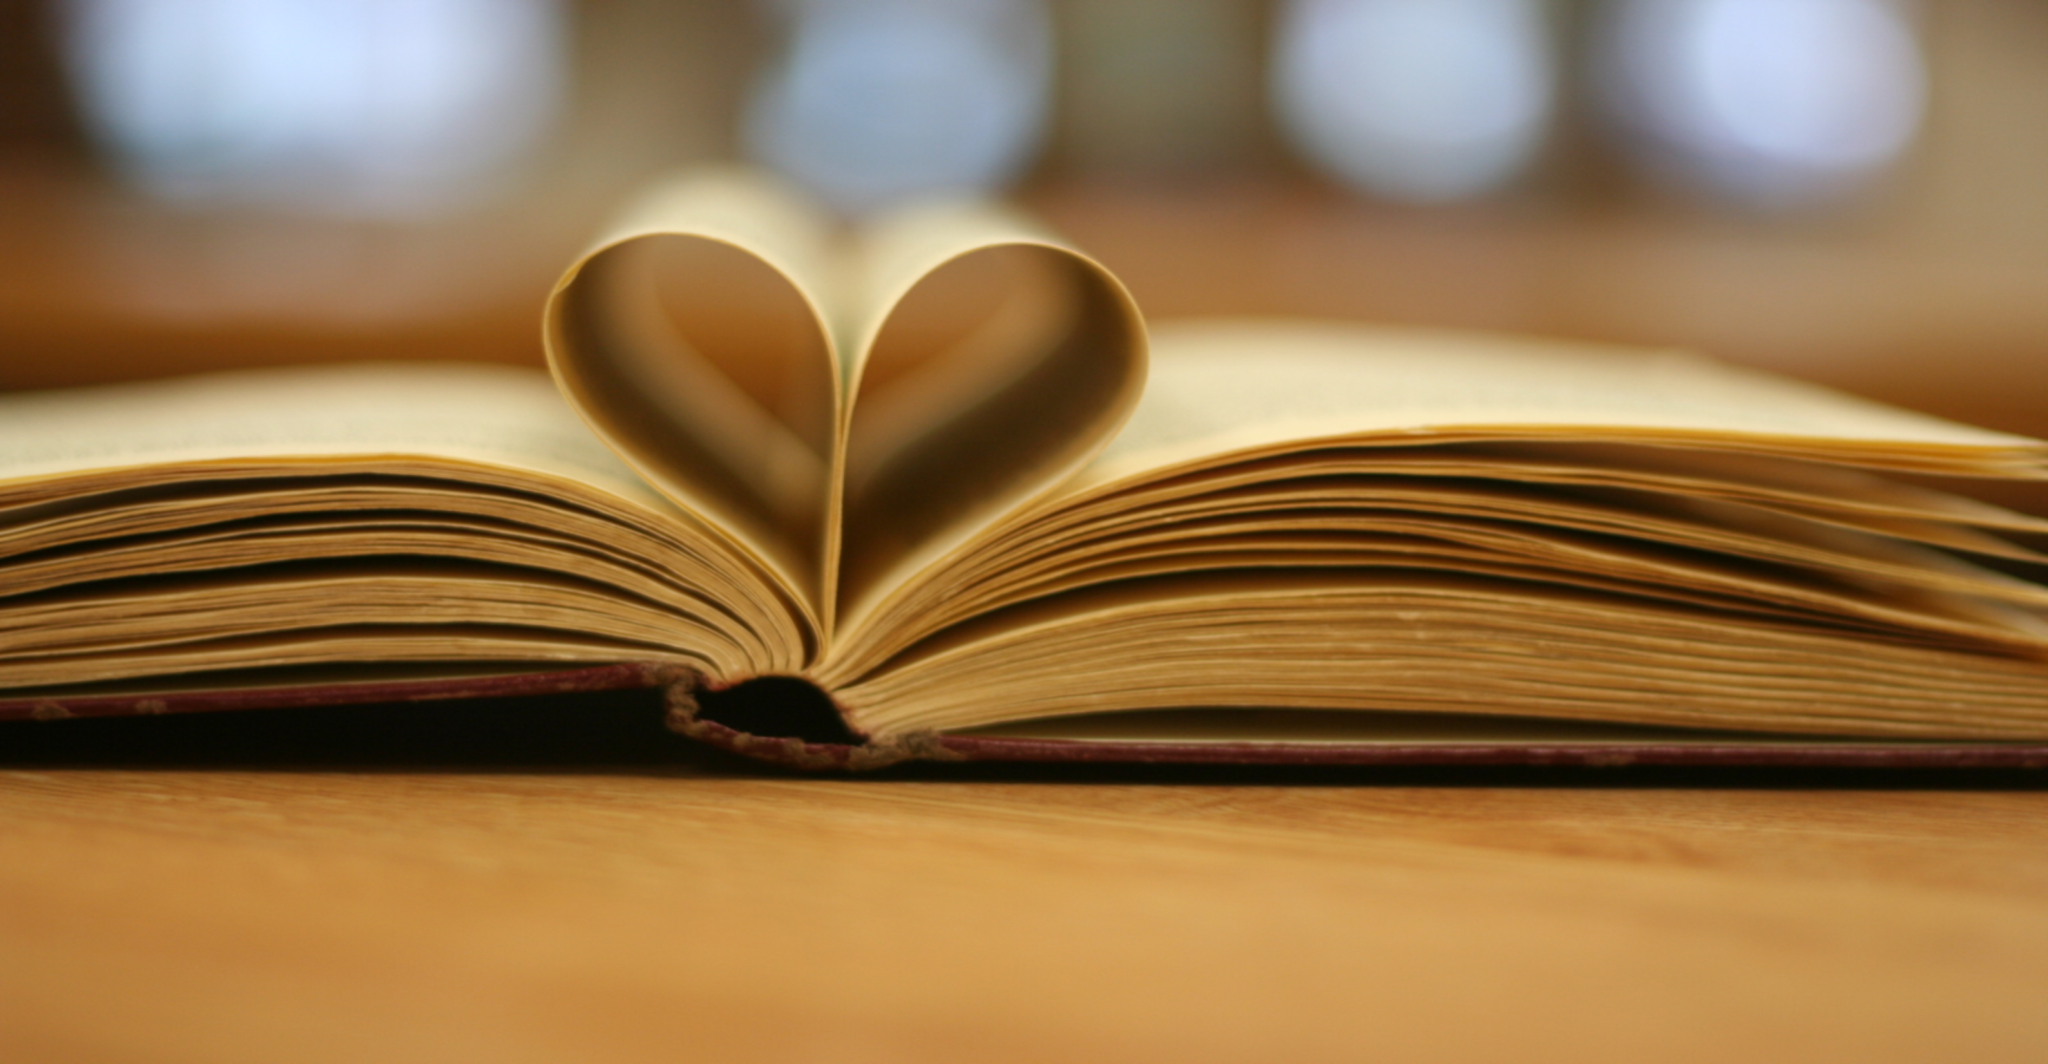 A book lying open with its center pages folded into the center to form a heart shape.